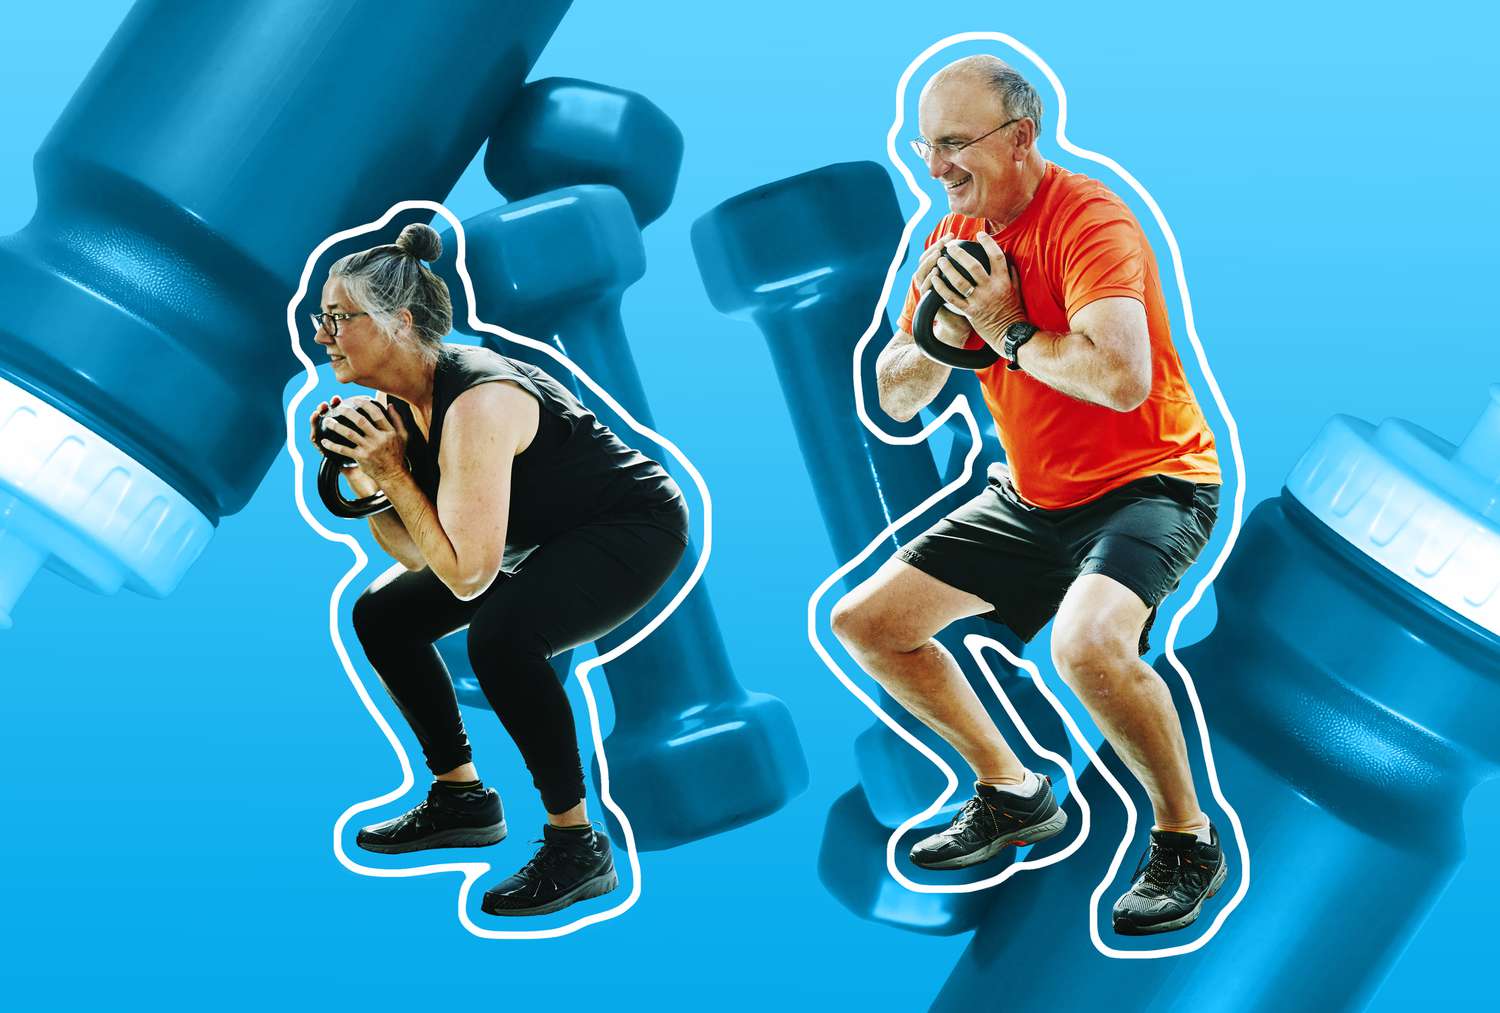 strength training over age 50